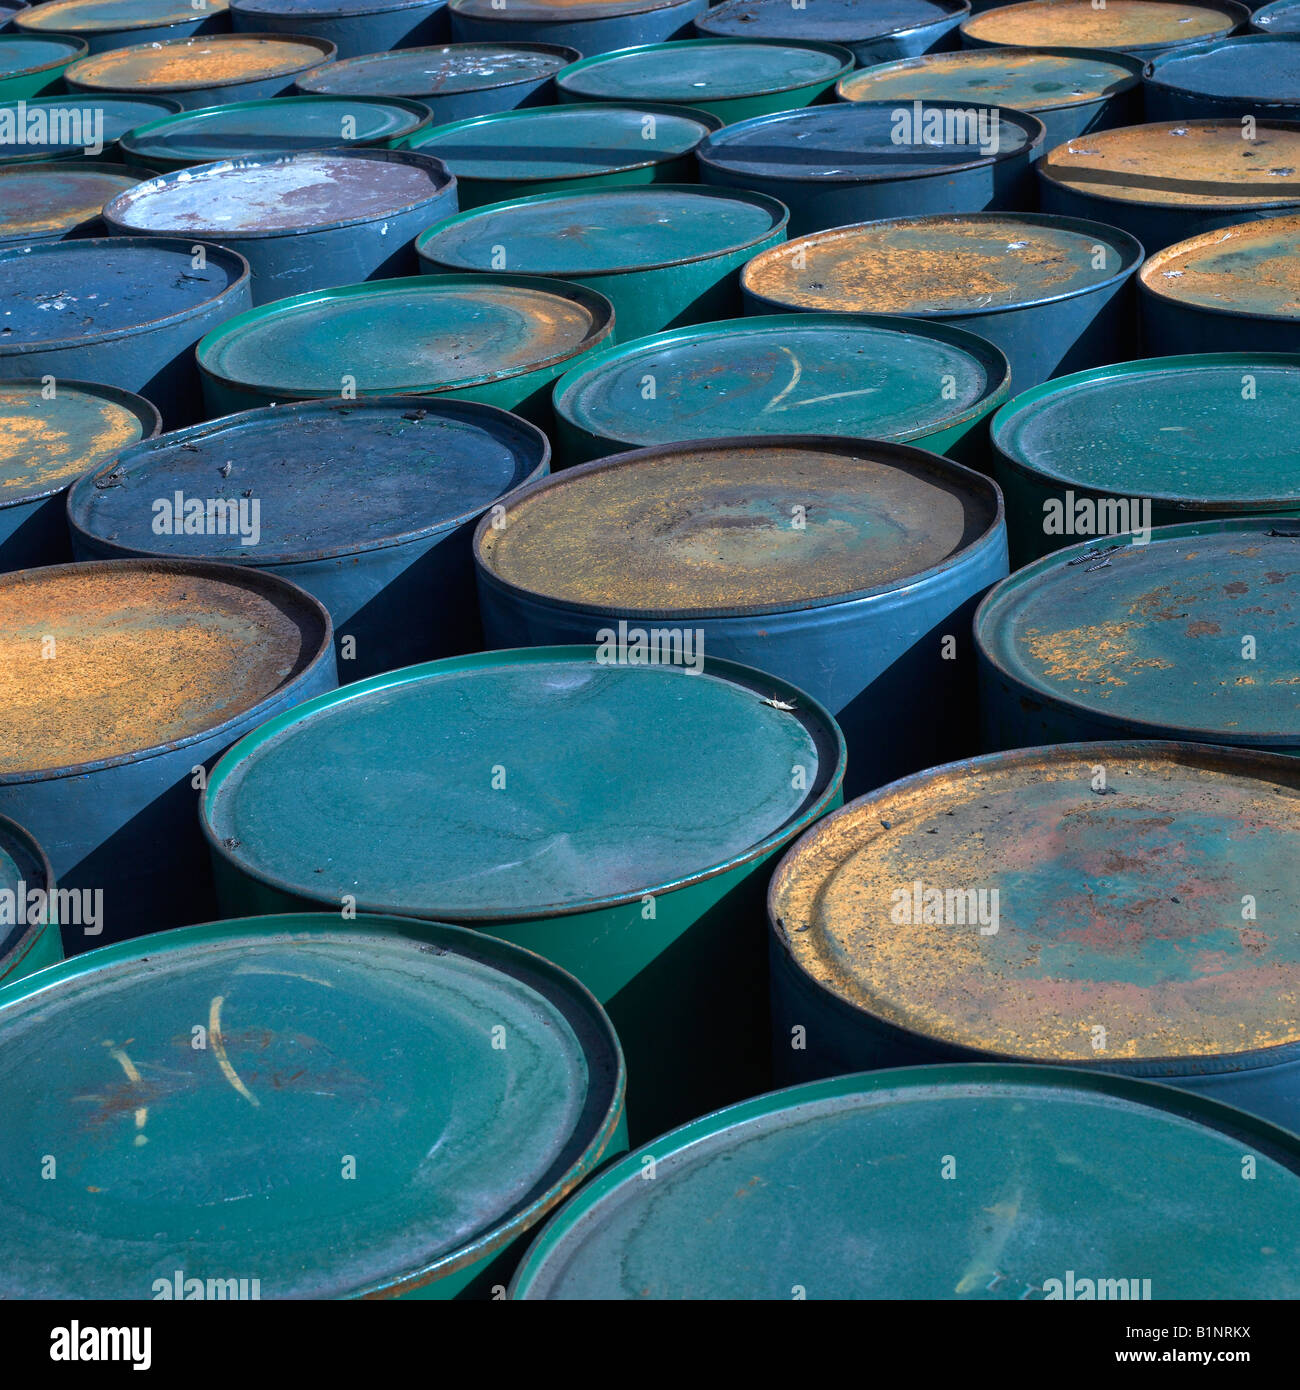 rusty metal containers Stock Photo